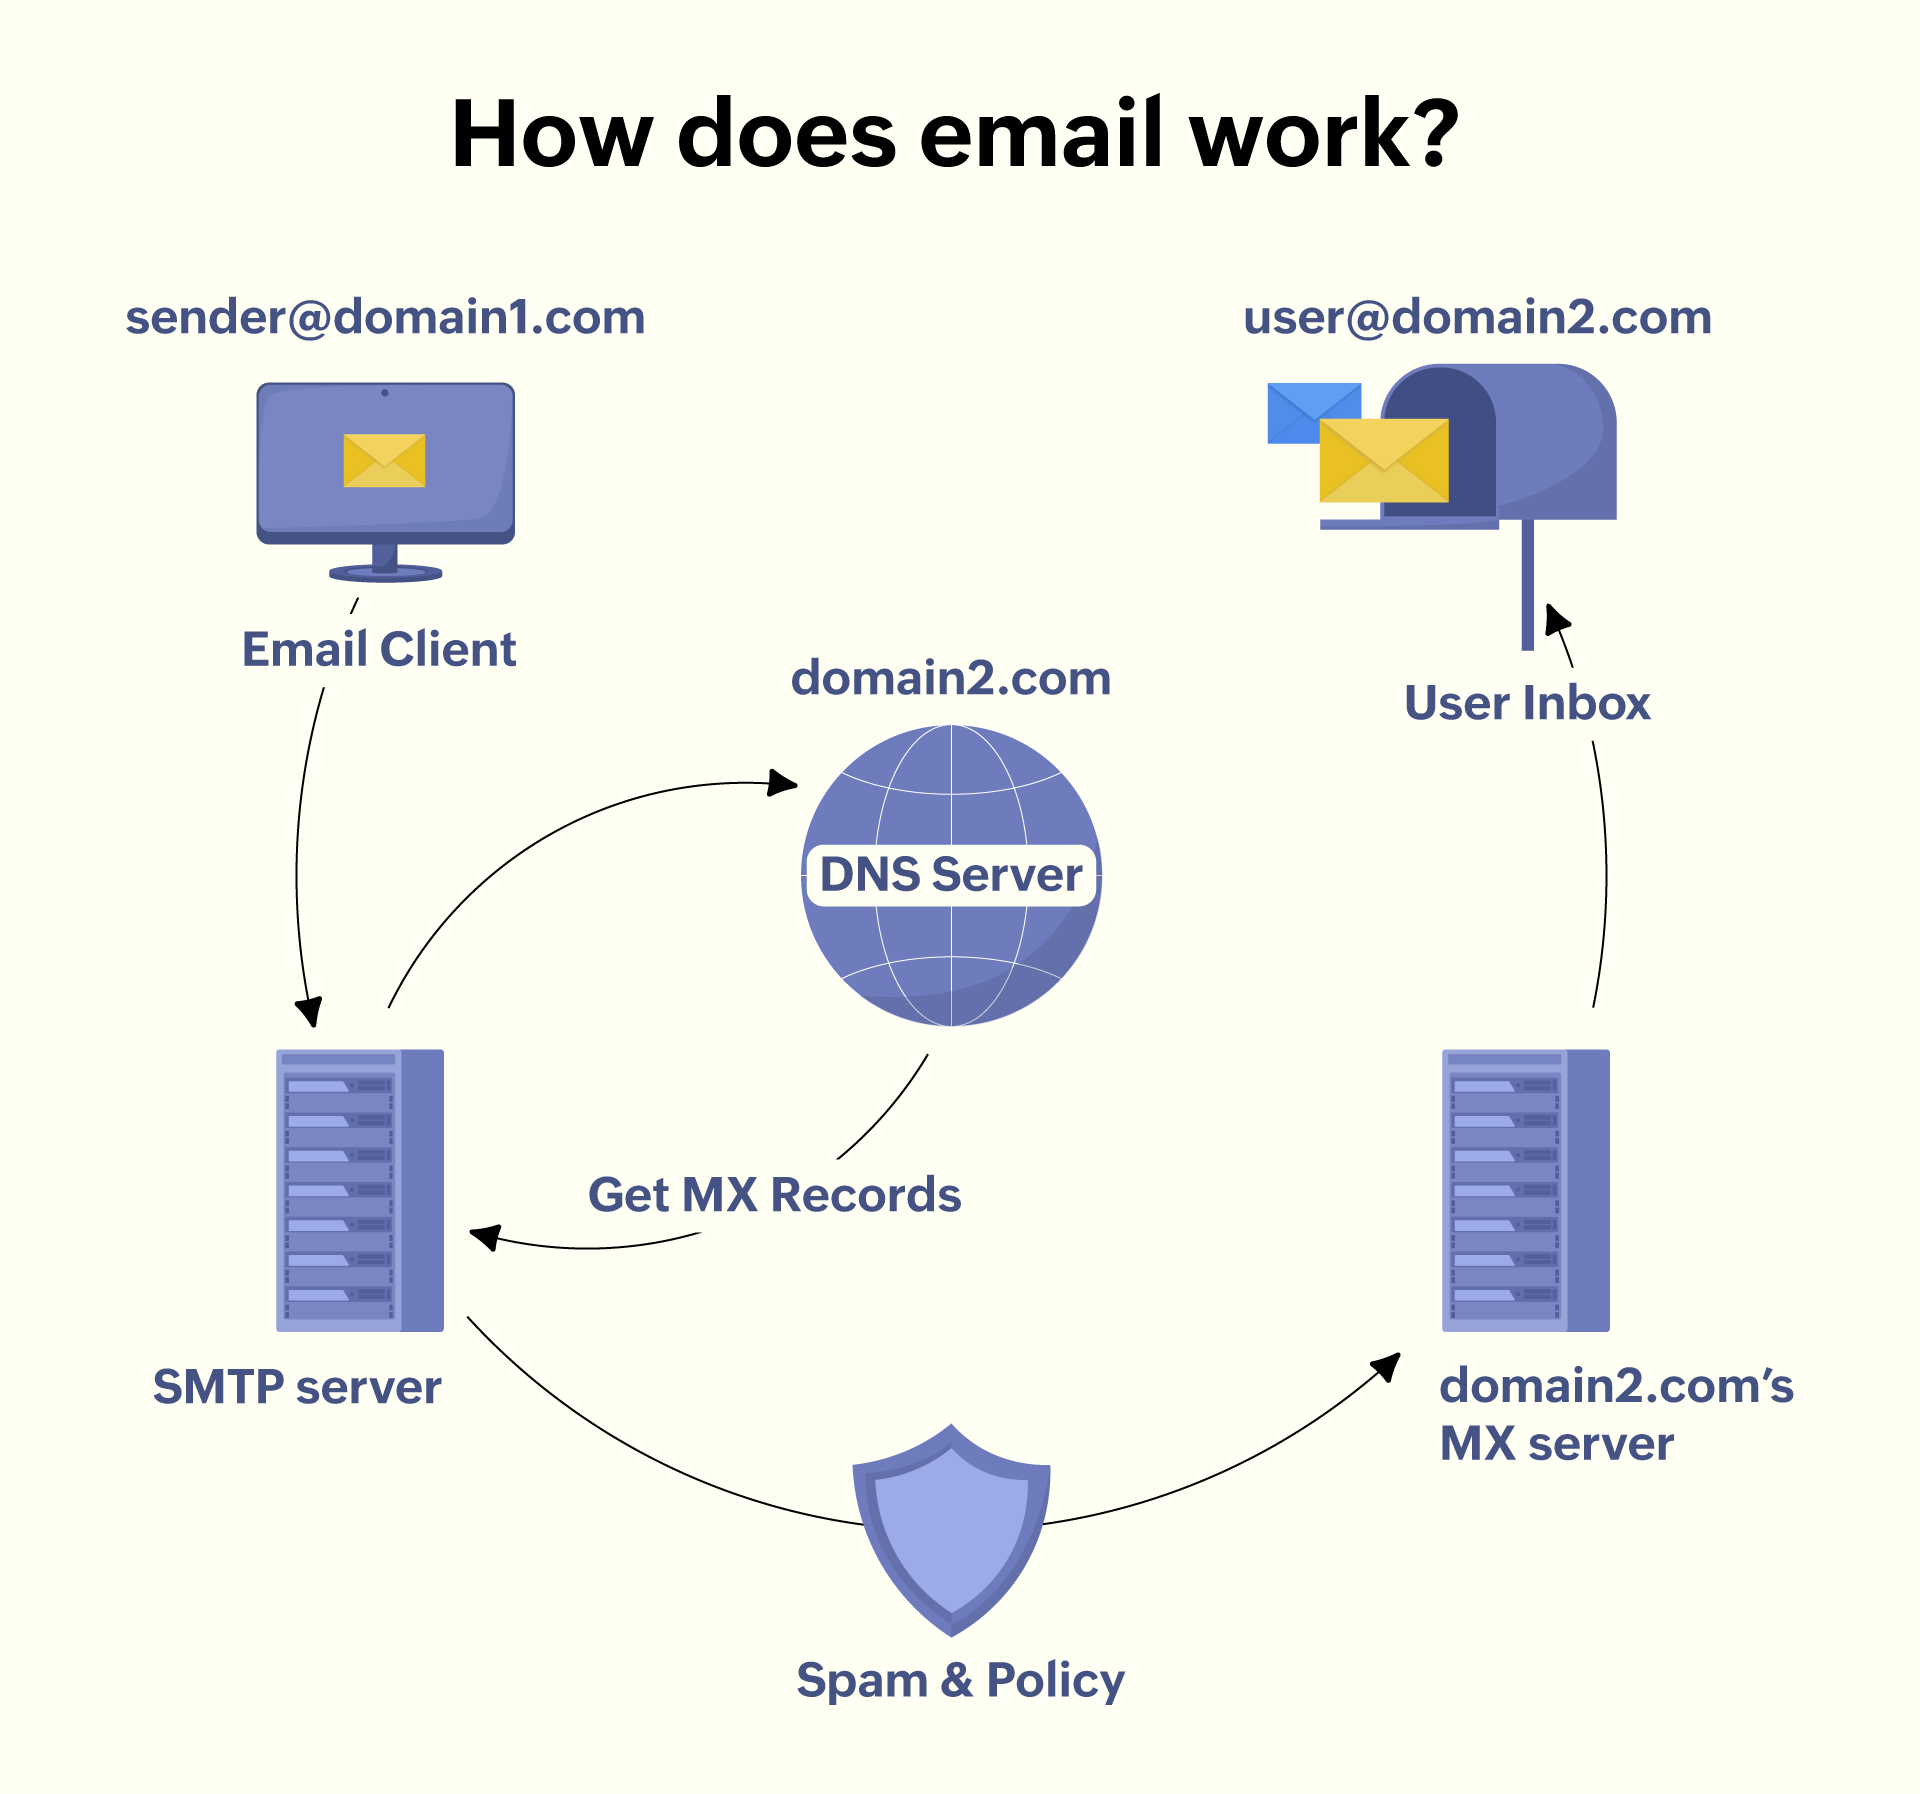 How does email work?